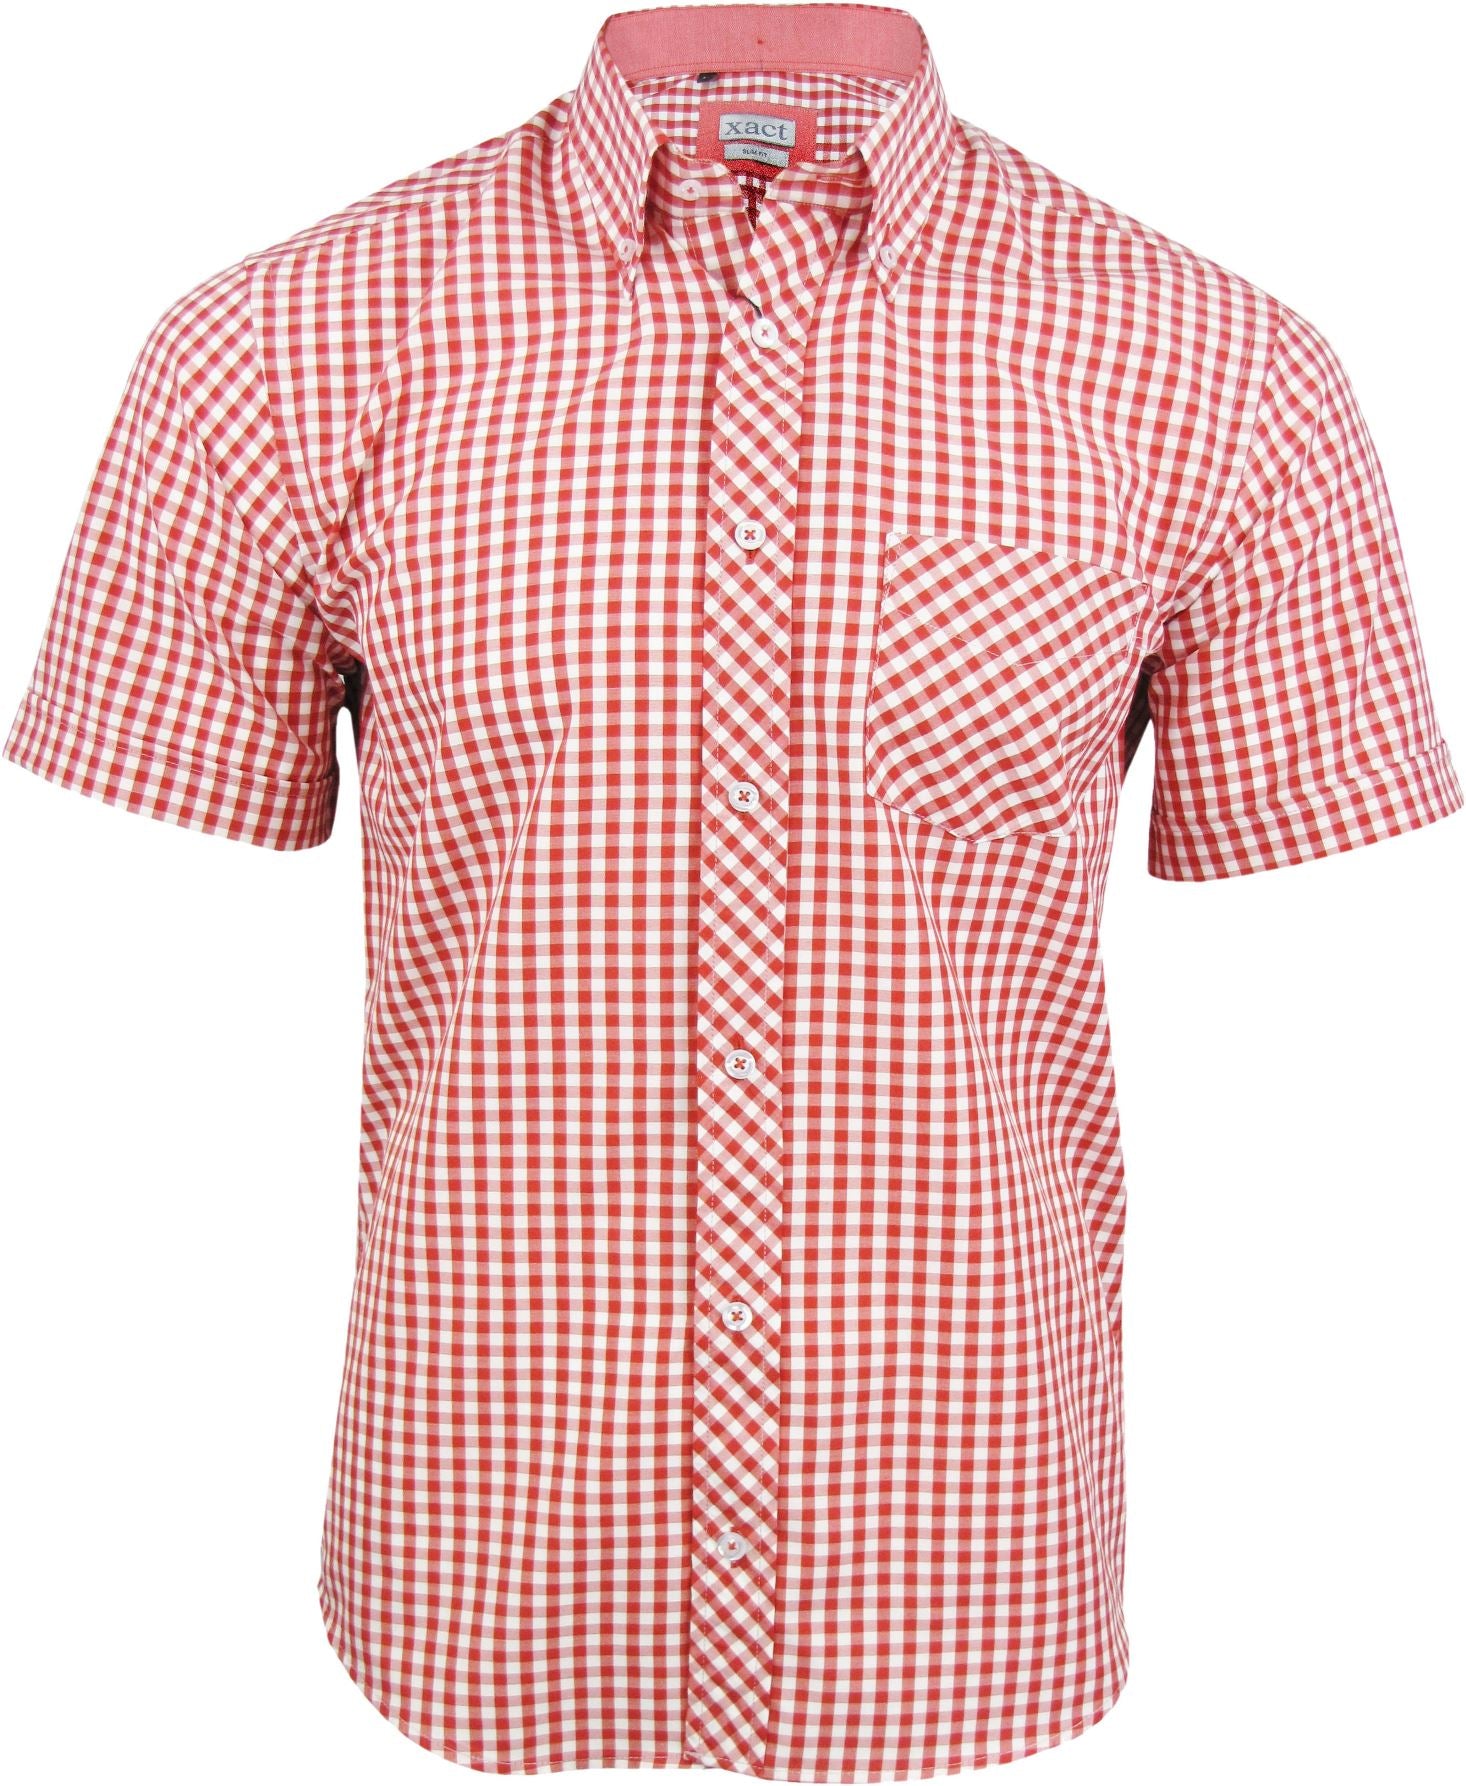 Mens Short Sleeve Gingham Check Shirt Button Down Collar Slim Fit By Xact-Main Image